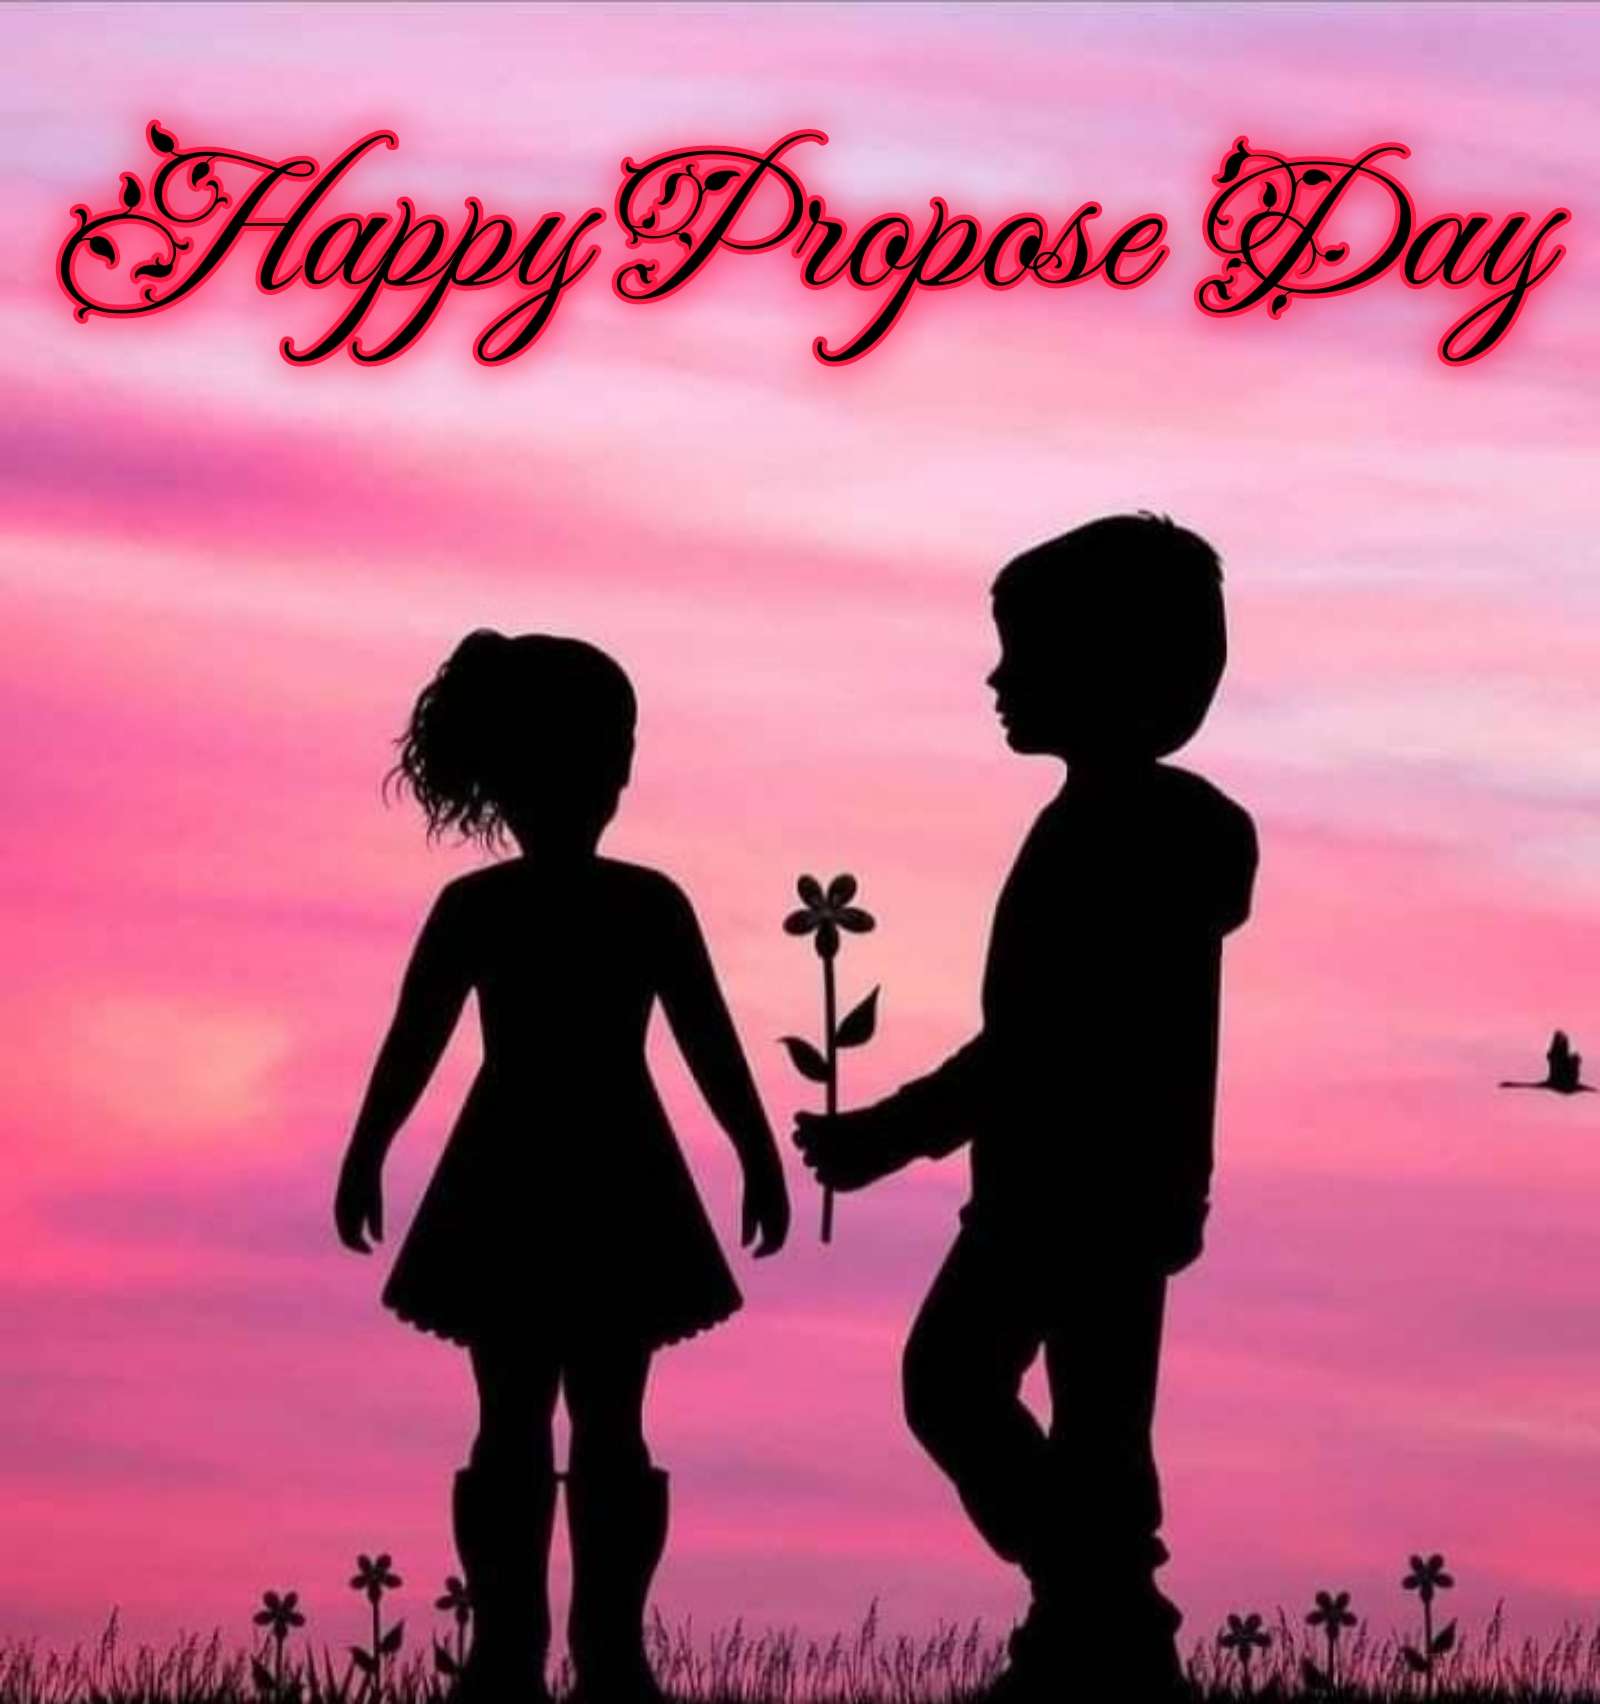 Special Propose Day Image Download